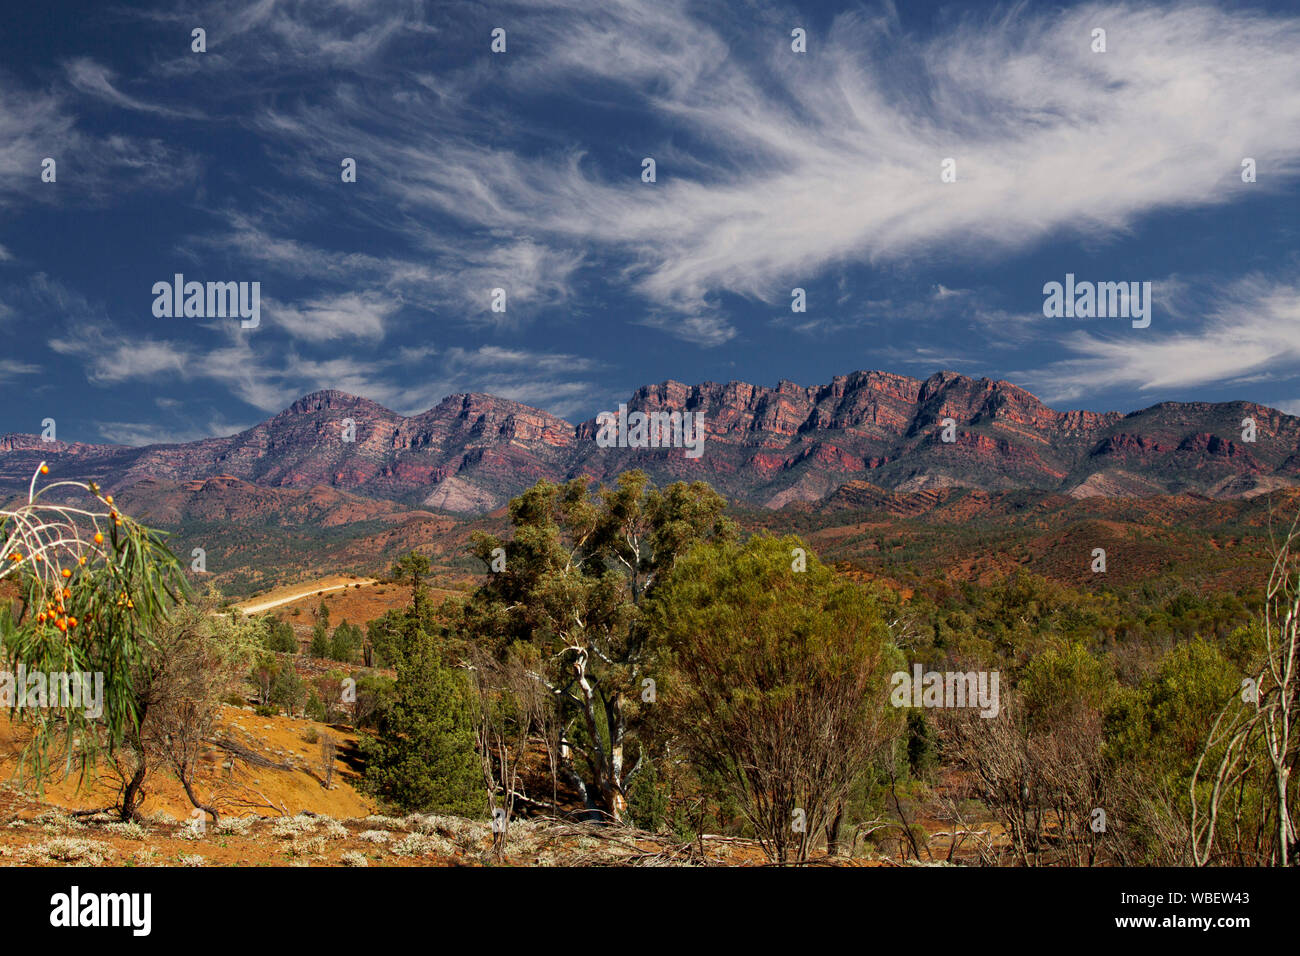 Stunning landscape in Flinders Ranges National Park with rugged red rocky ranges reaching up into blue sky streaked with clouds, South Australia Stock Photo